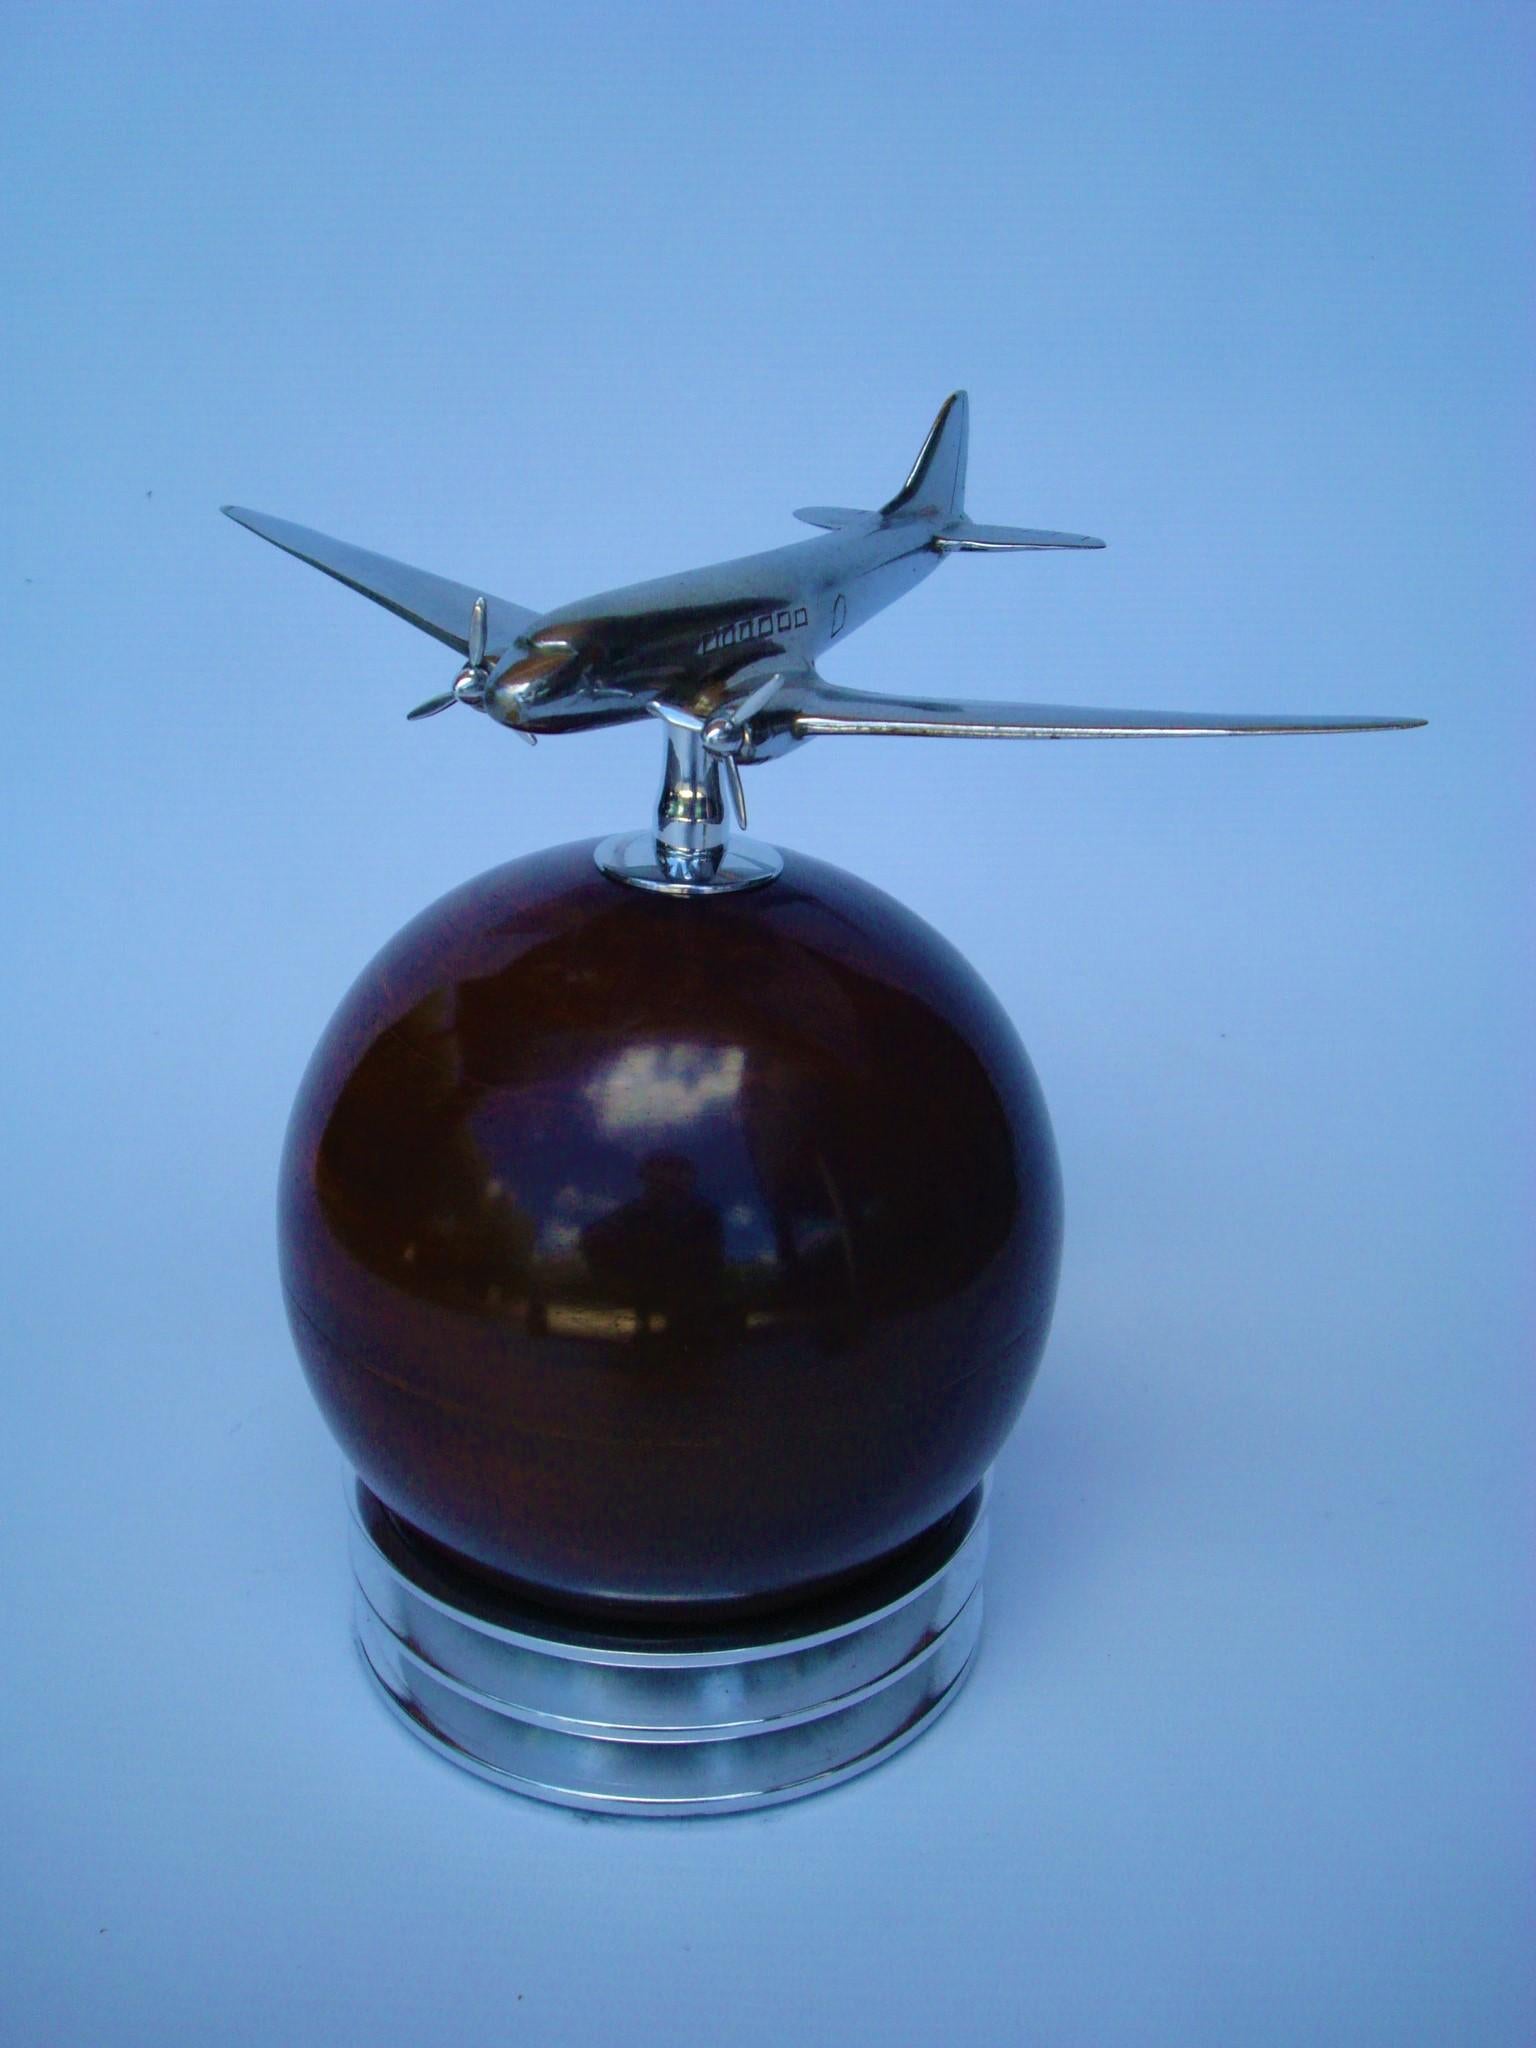 Art Deco - Modernism airplane desk model. Fantastic Douglas DC-3 Silvered Brass over wooden and aluminium base. Lovely Aviation item. Airplane over the world. ca. 1930´s

The Douglas DC-3 is a propeller-driven airliner which had a lasting effect